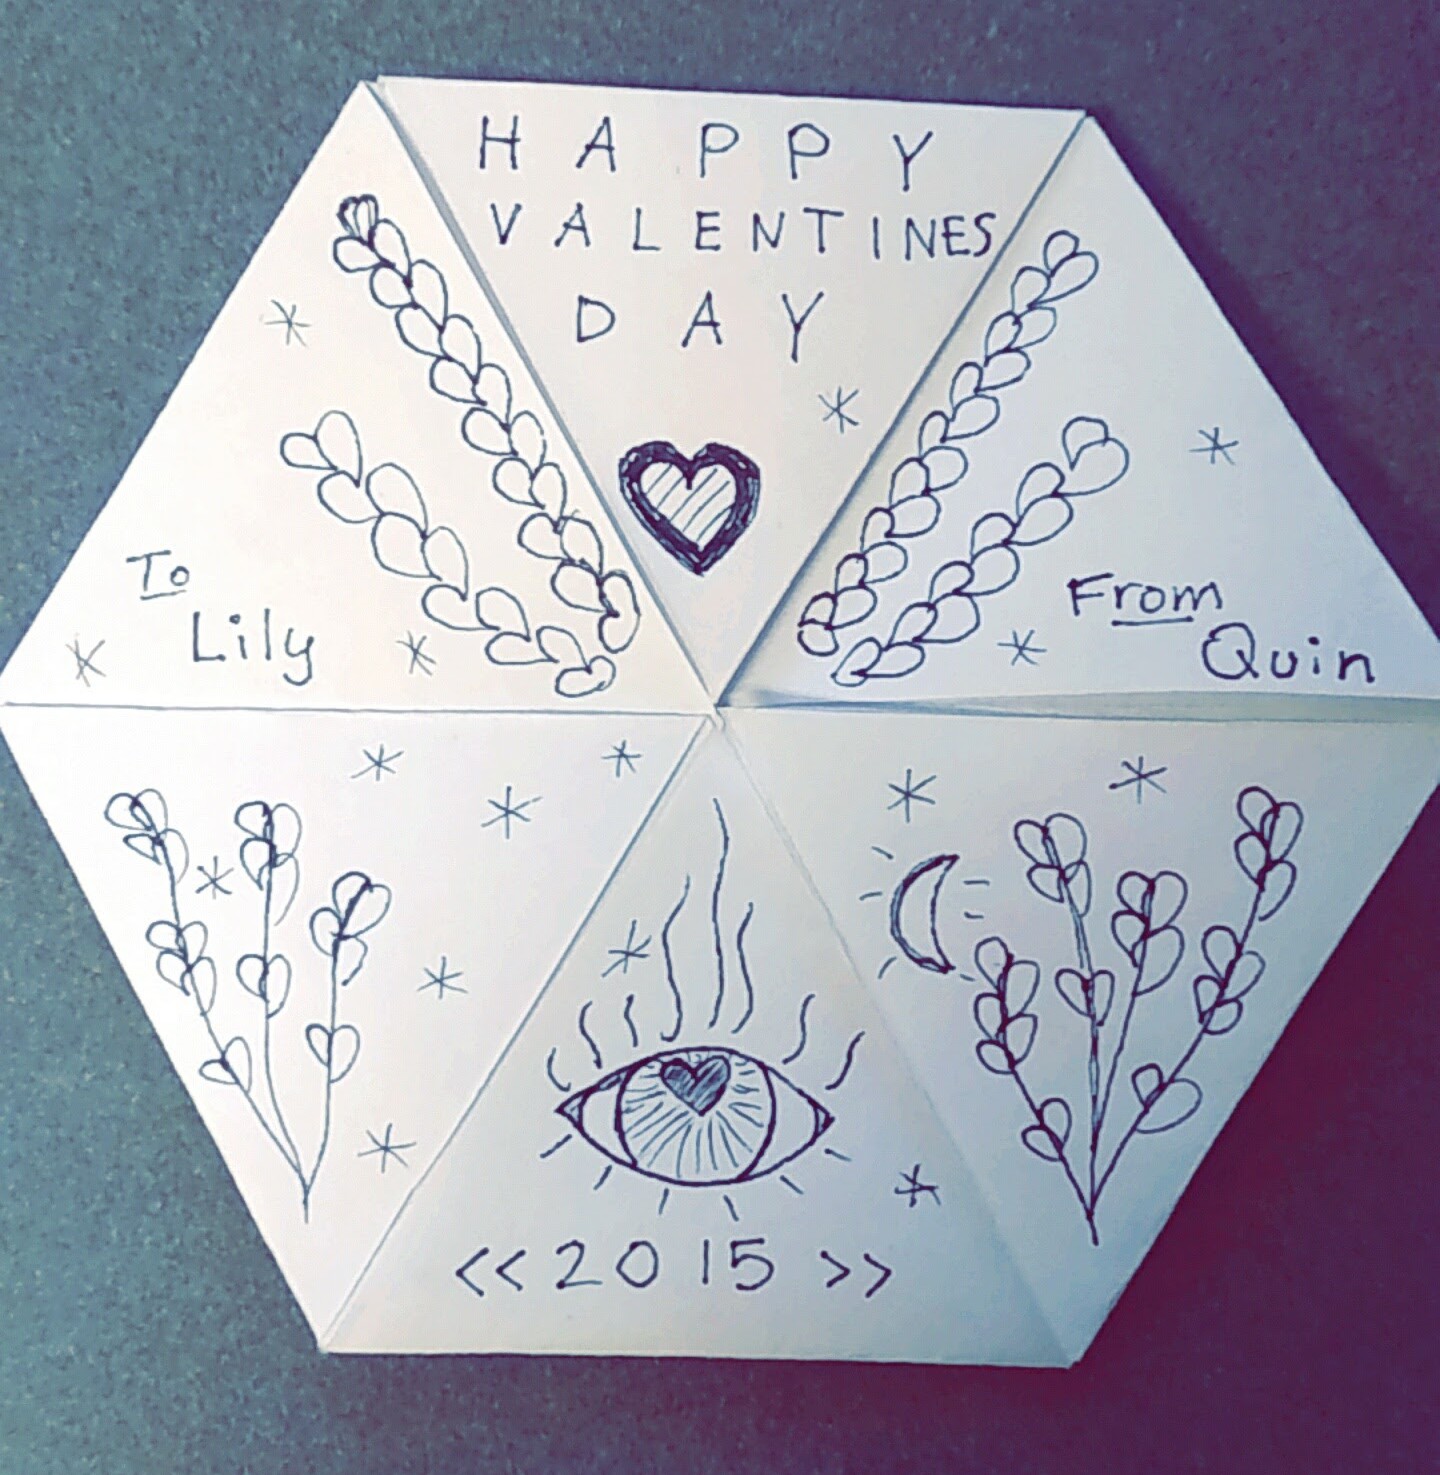 White paper folded into a hexagon, covered in pencil doodles of stars, plants, and an eye with a heart pupil. It reads: Happy valentines day. To Lily, From Quin. 2015.